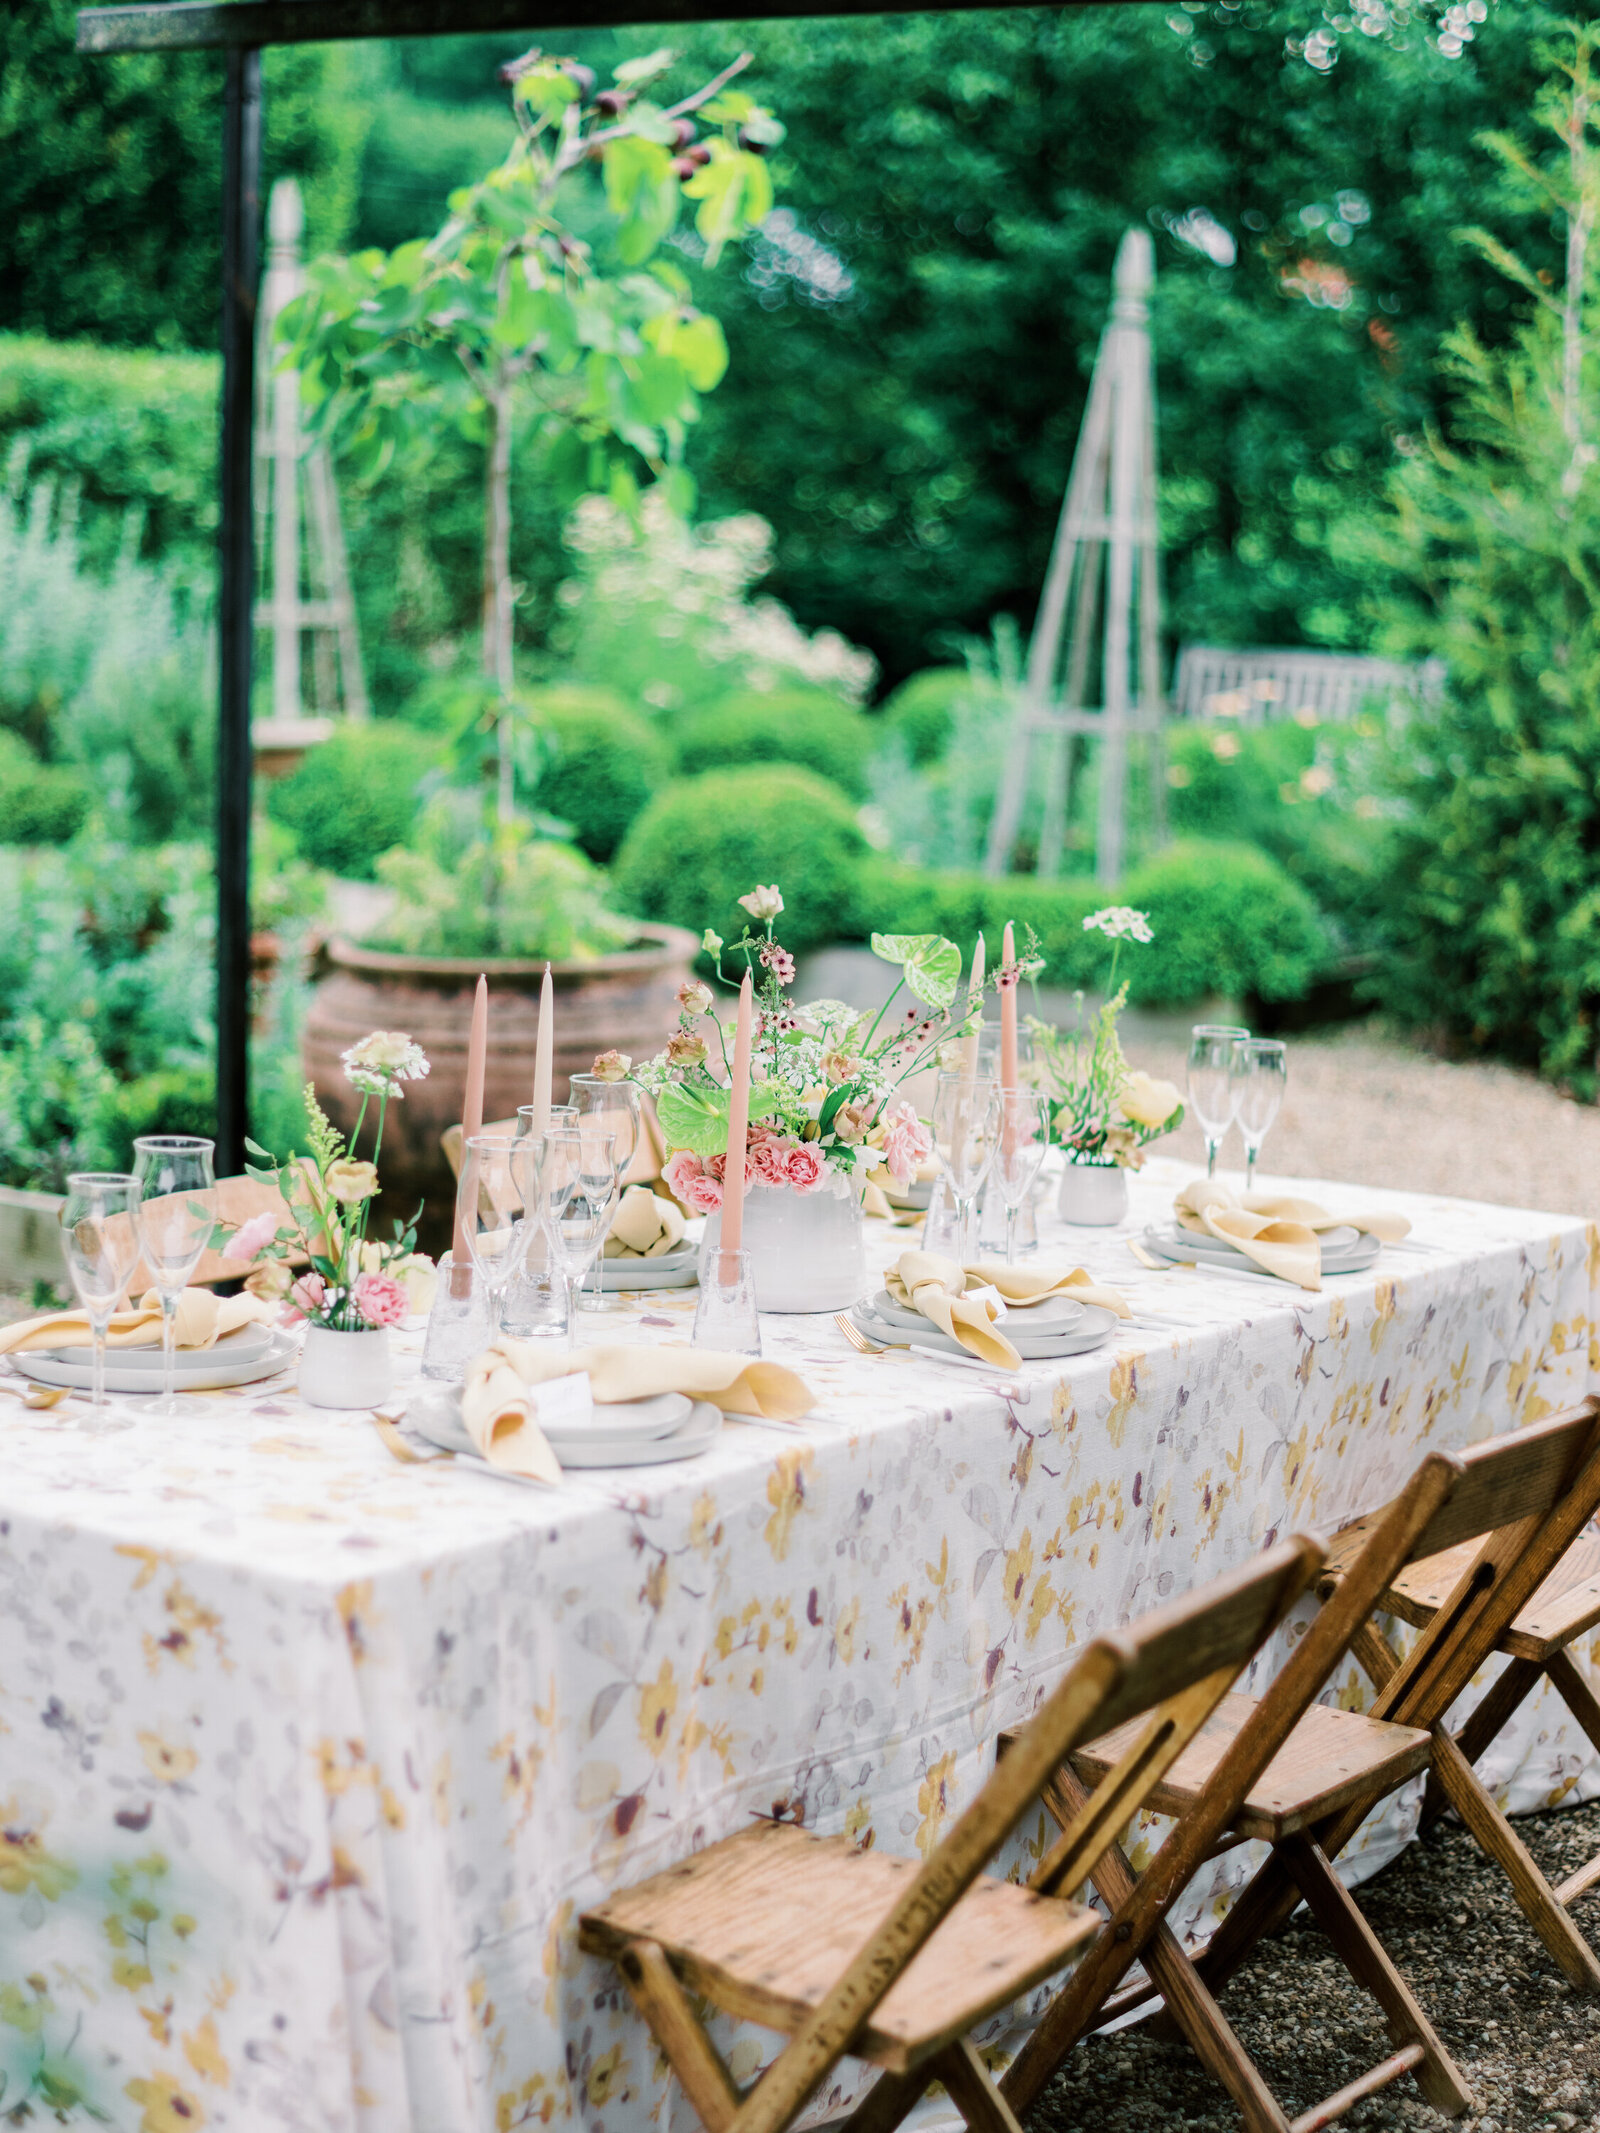 Dinner table set for guests in a garden